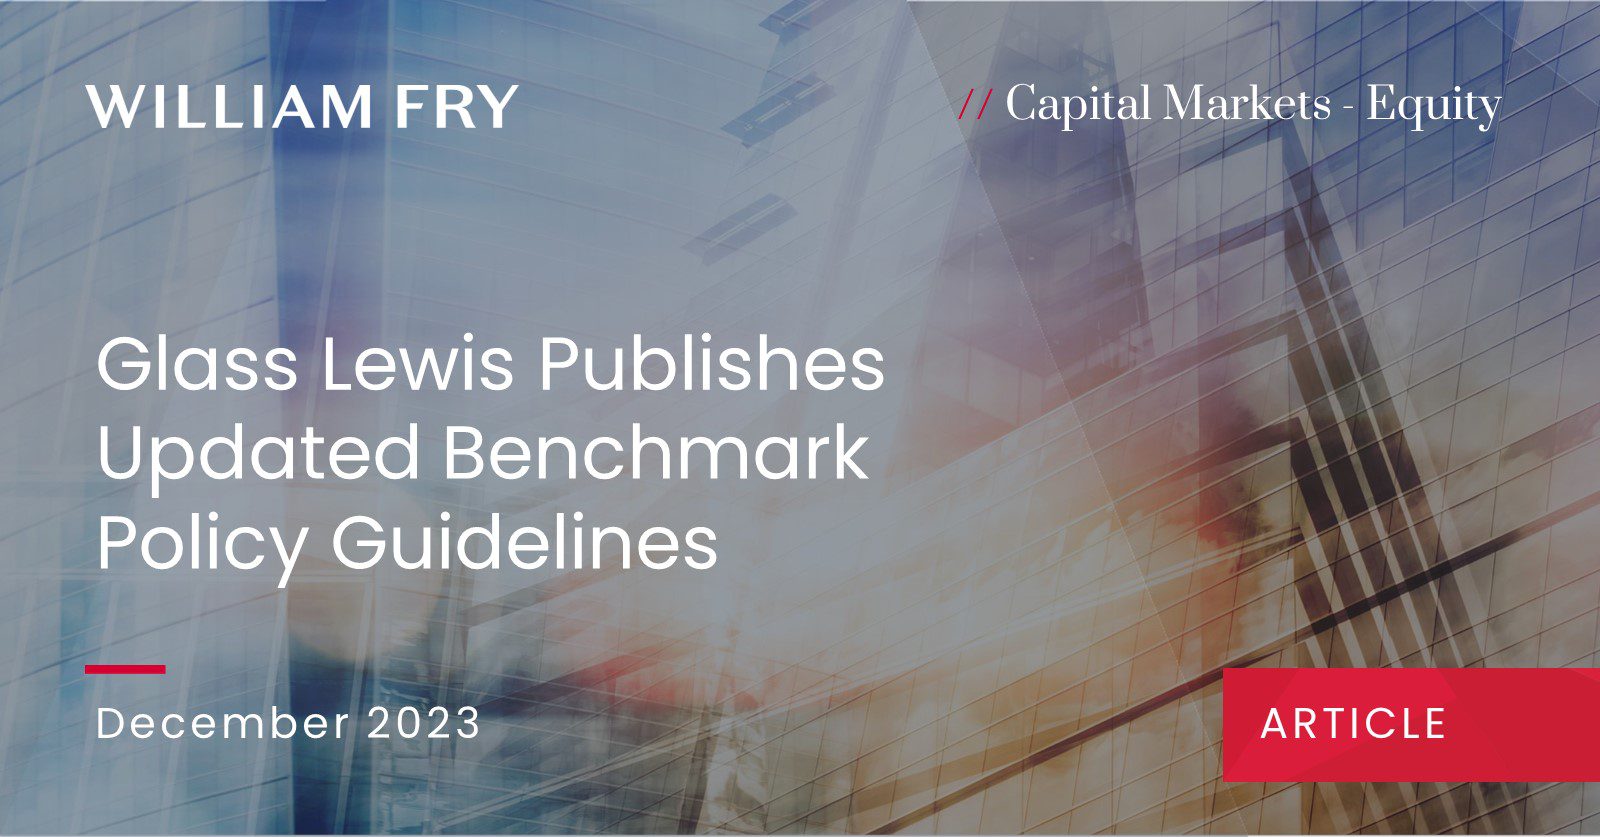 Glass Lewis Publishes Updated Benchmark Policy Guidelines